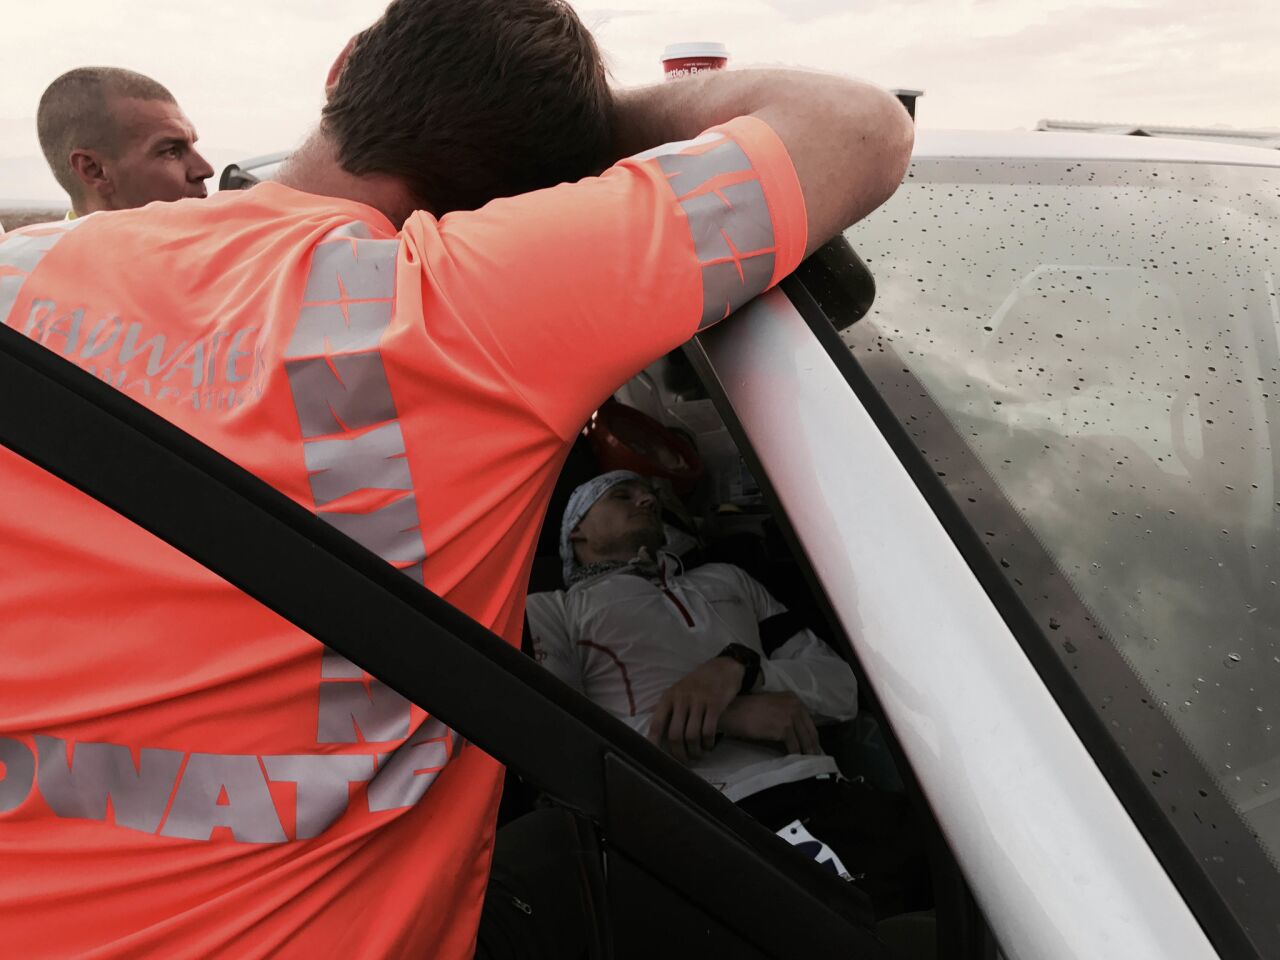 Personal trainer Jared Fetterolf was advised to lie down in his support van to quell stomach pain, which he did as a paramedic looked on. He only lasted a couple minutes before he couldn't stand not moving, and rejoined the race.